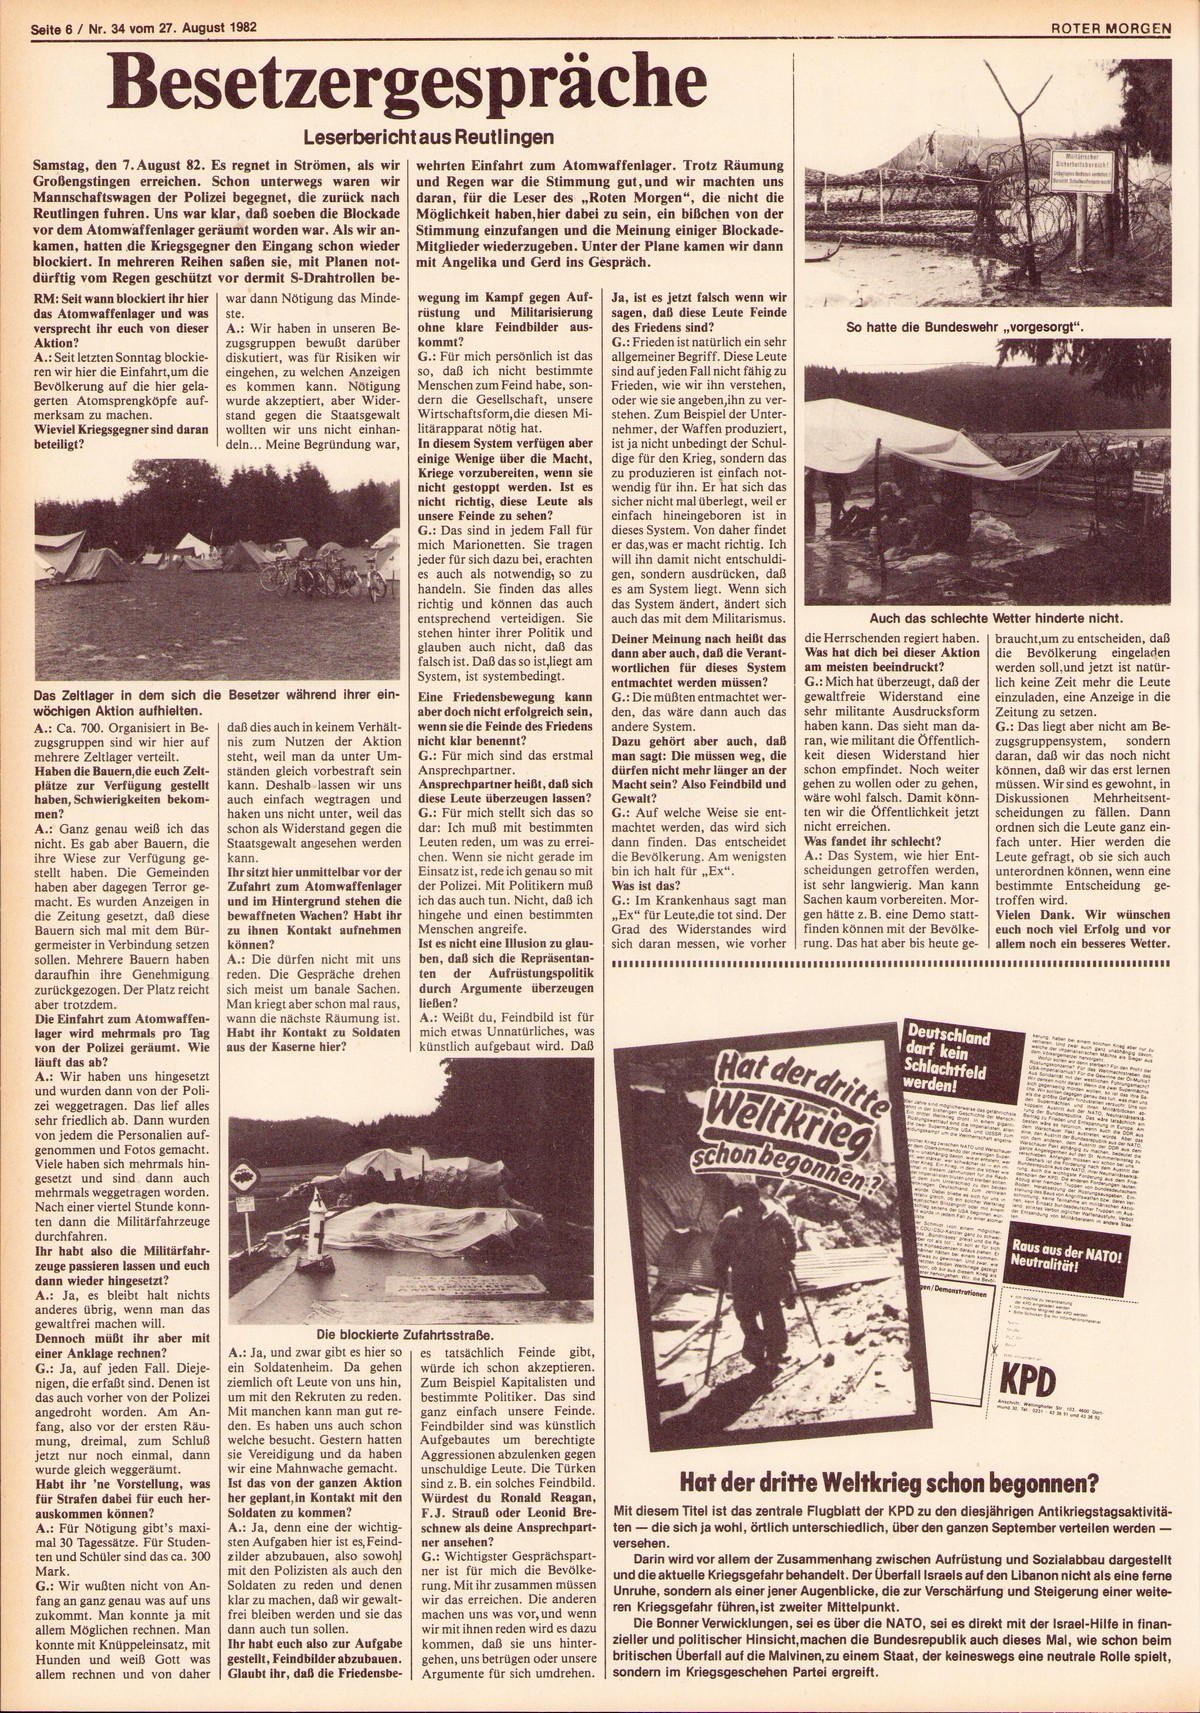 Roter Morgen, 16. Jg., 27. August 1982, Nr. 34, Seite 6